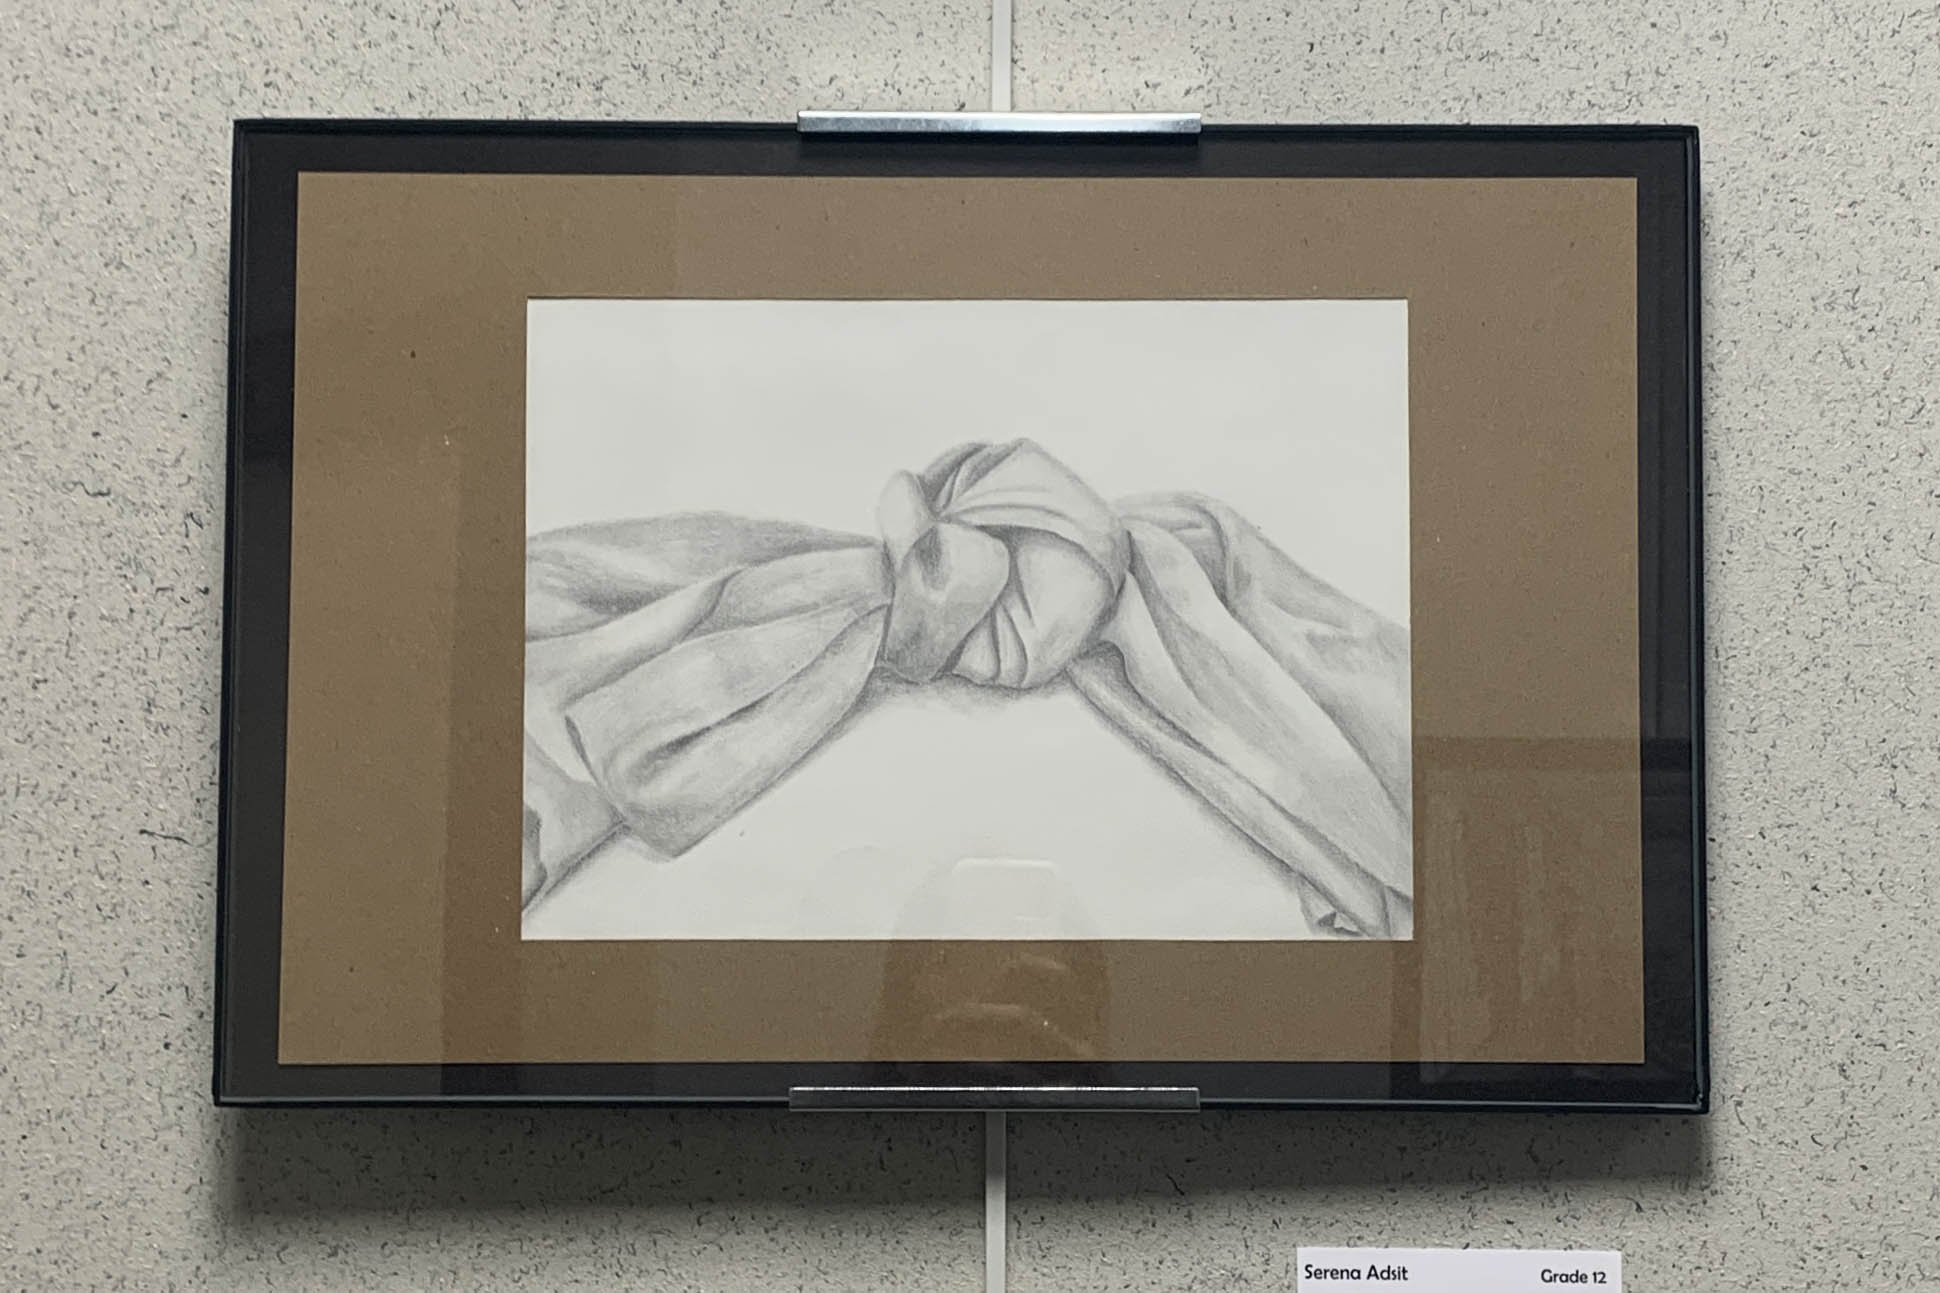 pencil drawing of scarf tied in knot